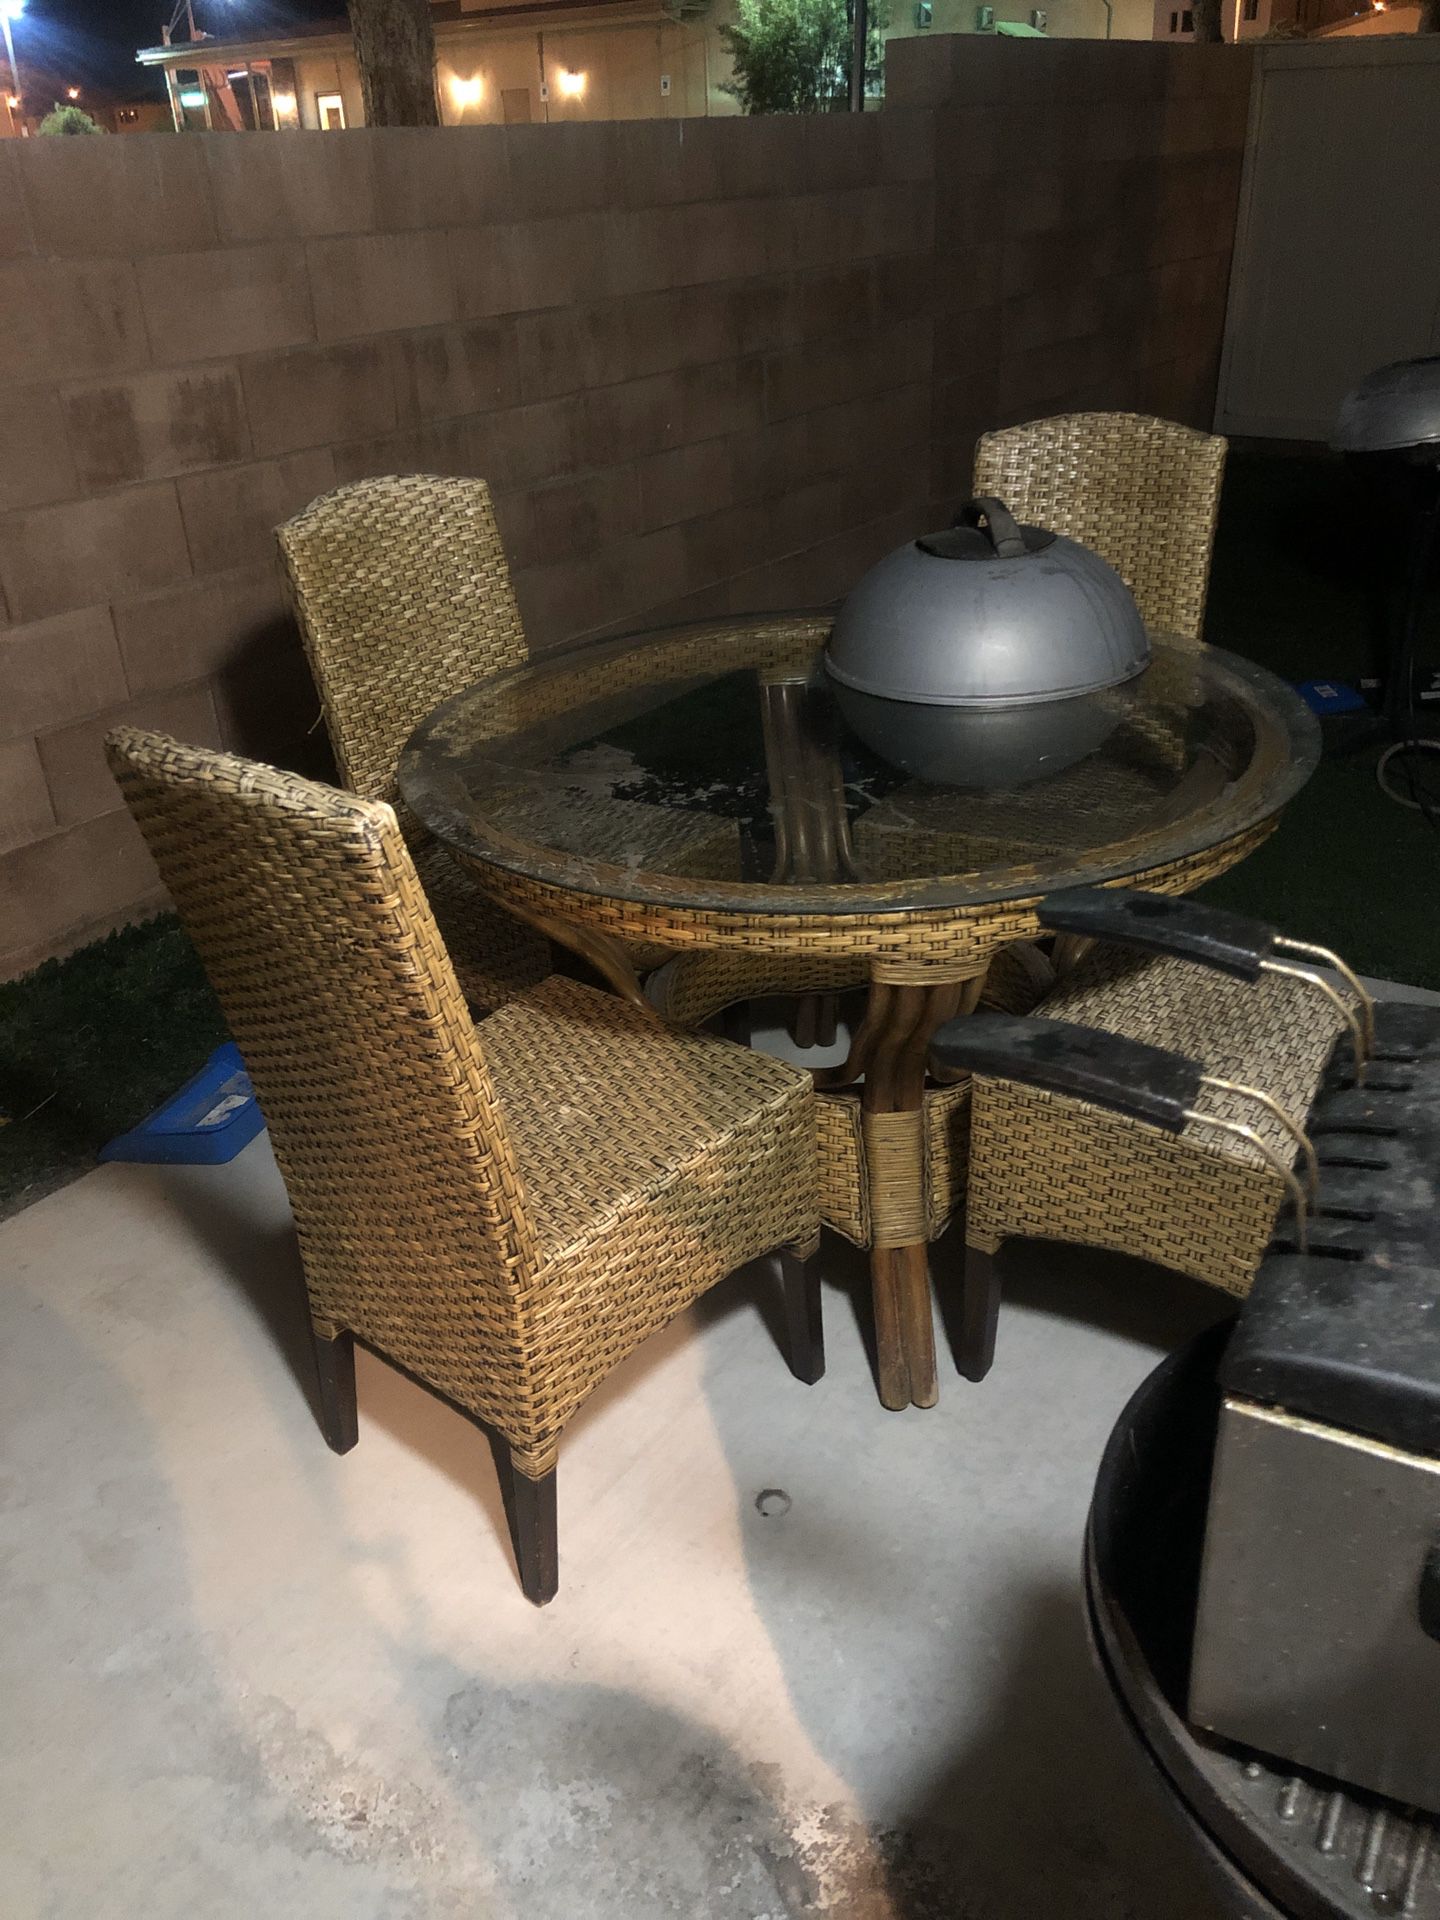 $50 Pier one wicker patio set. Table in excellent condition. 4 chairs, 1 chair is worn but still manageable.